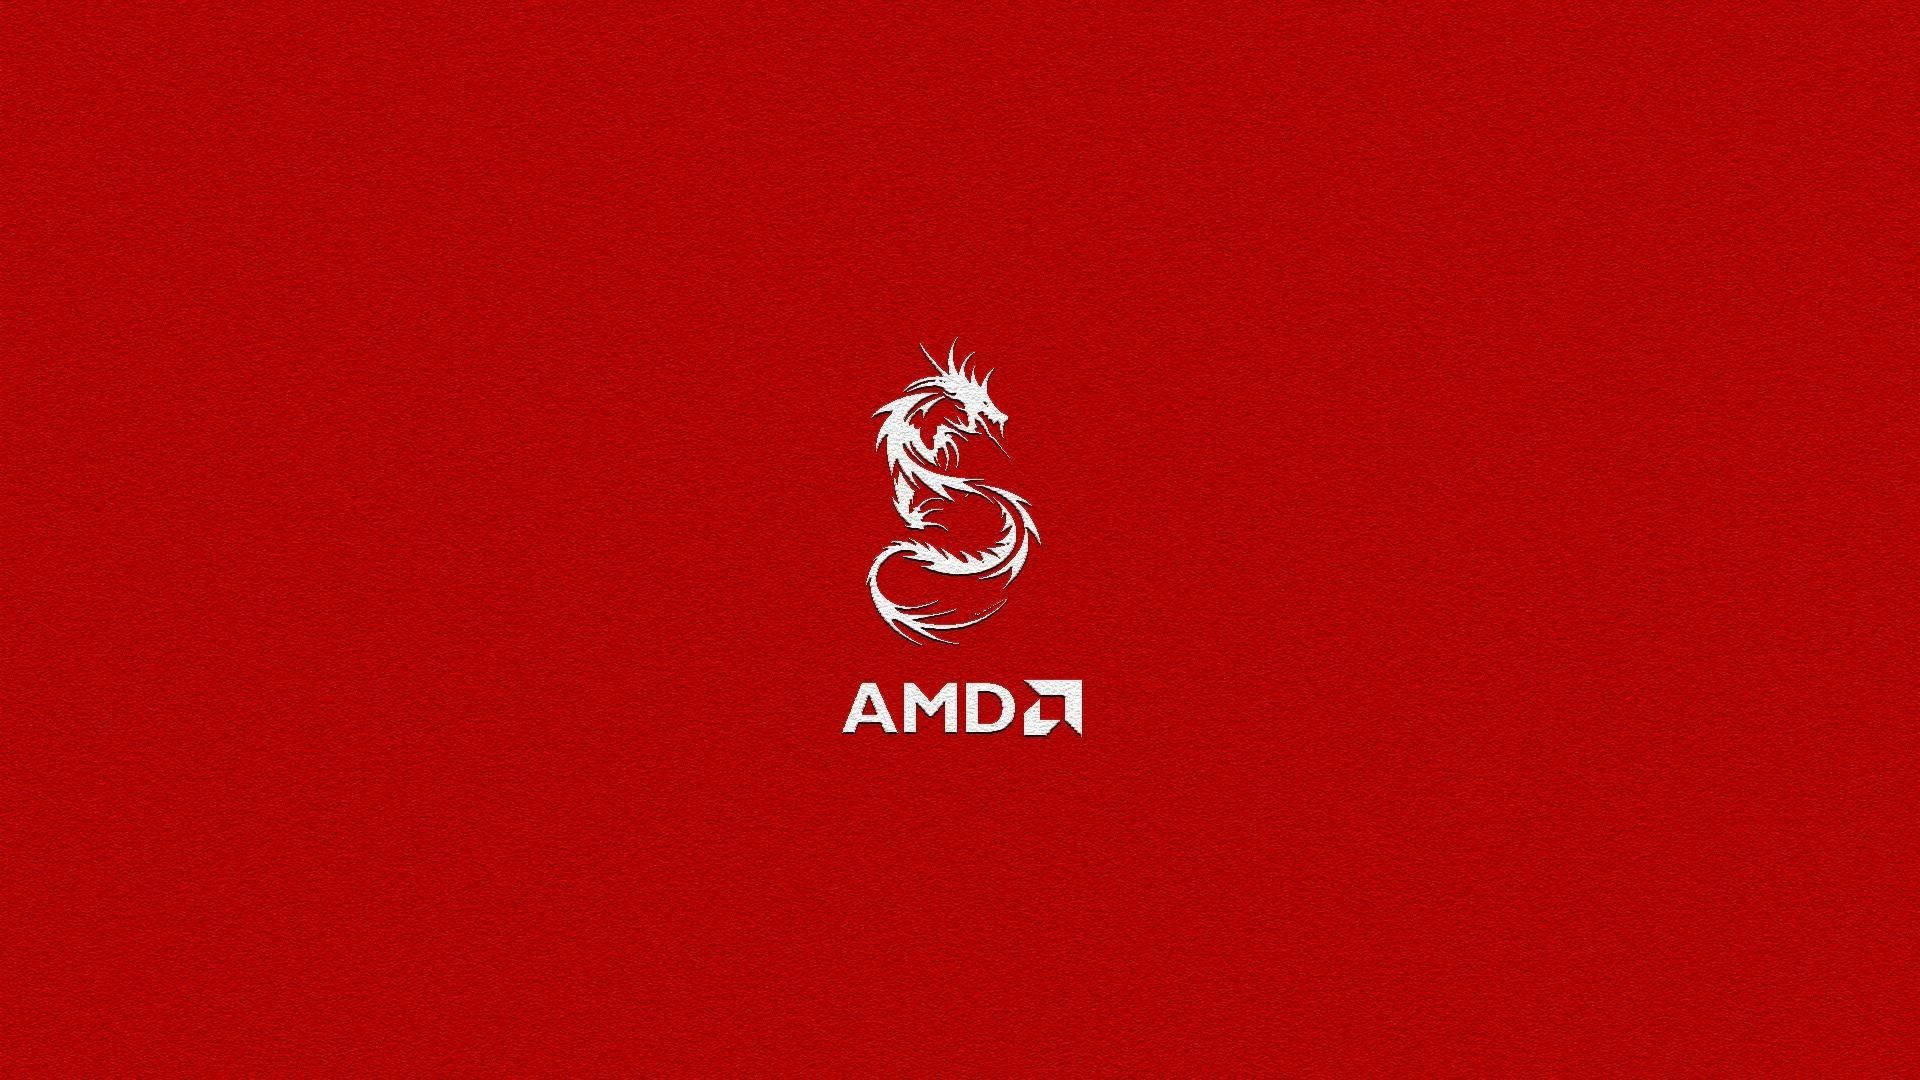 Amd Dragon Red Surface Background